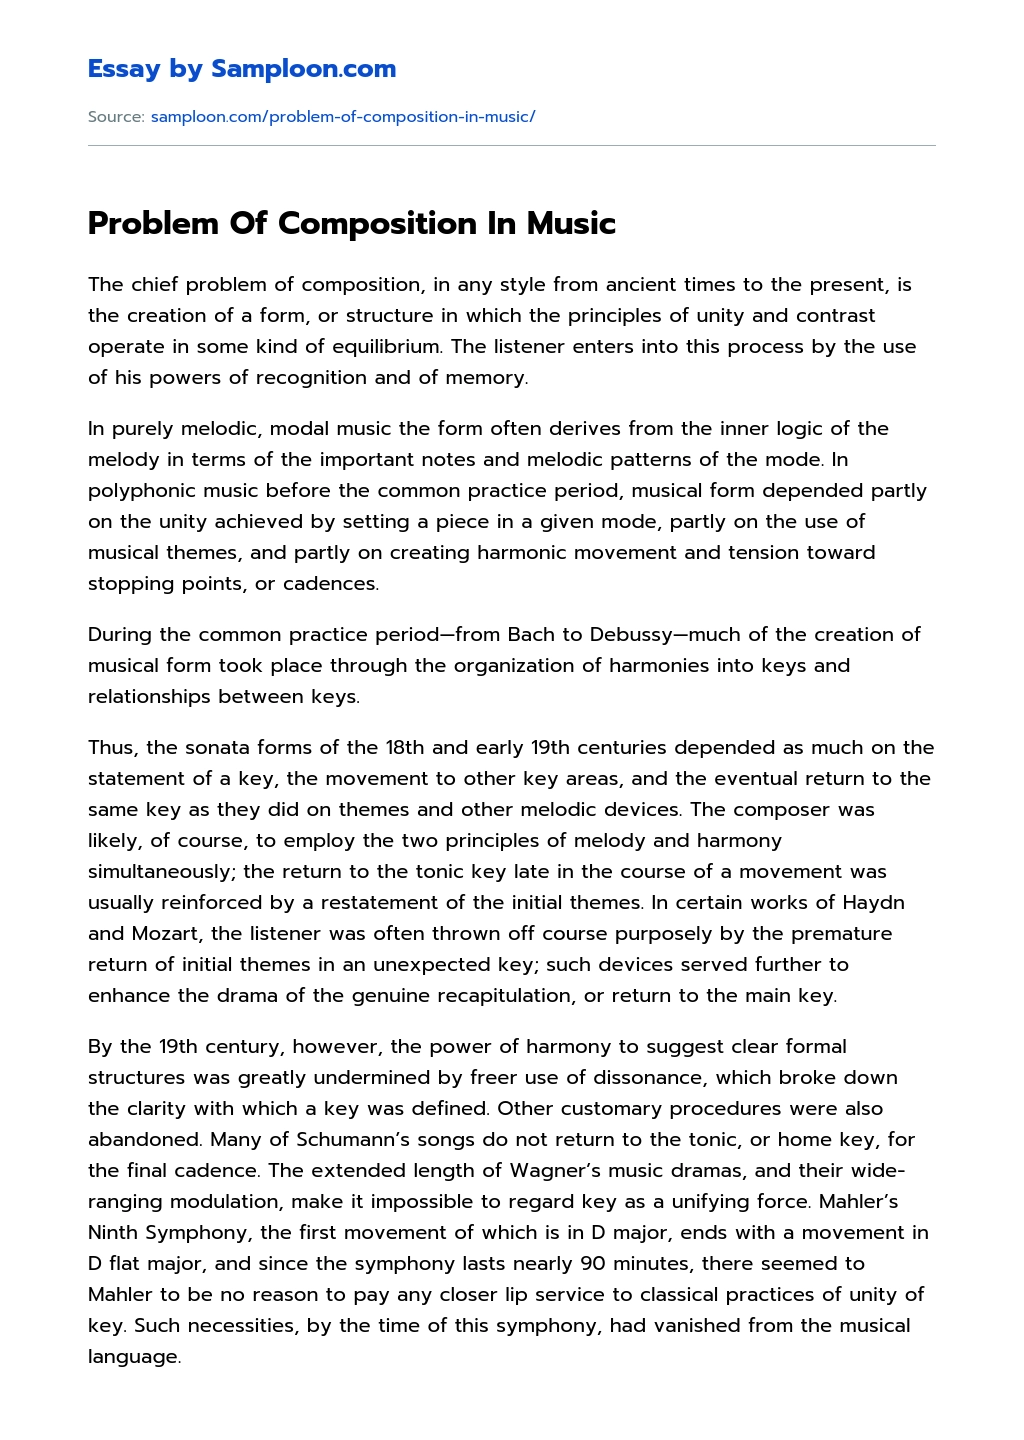 Problem Of Composition In Music essay